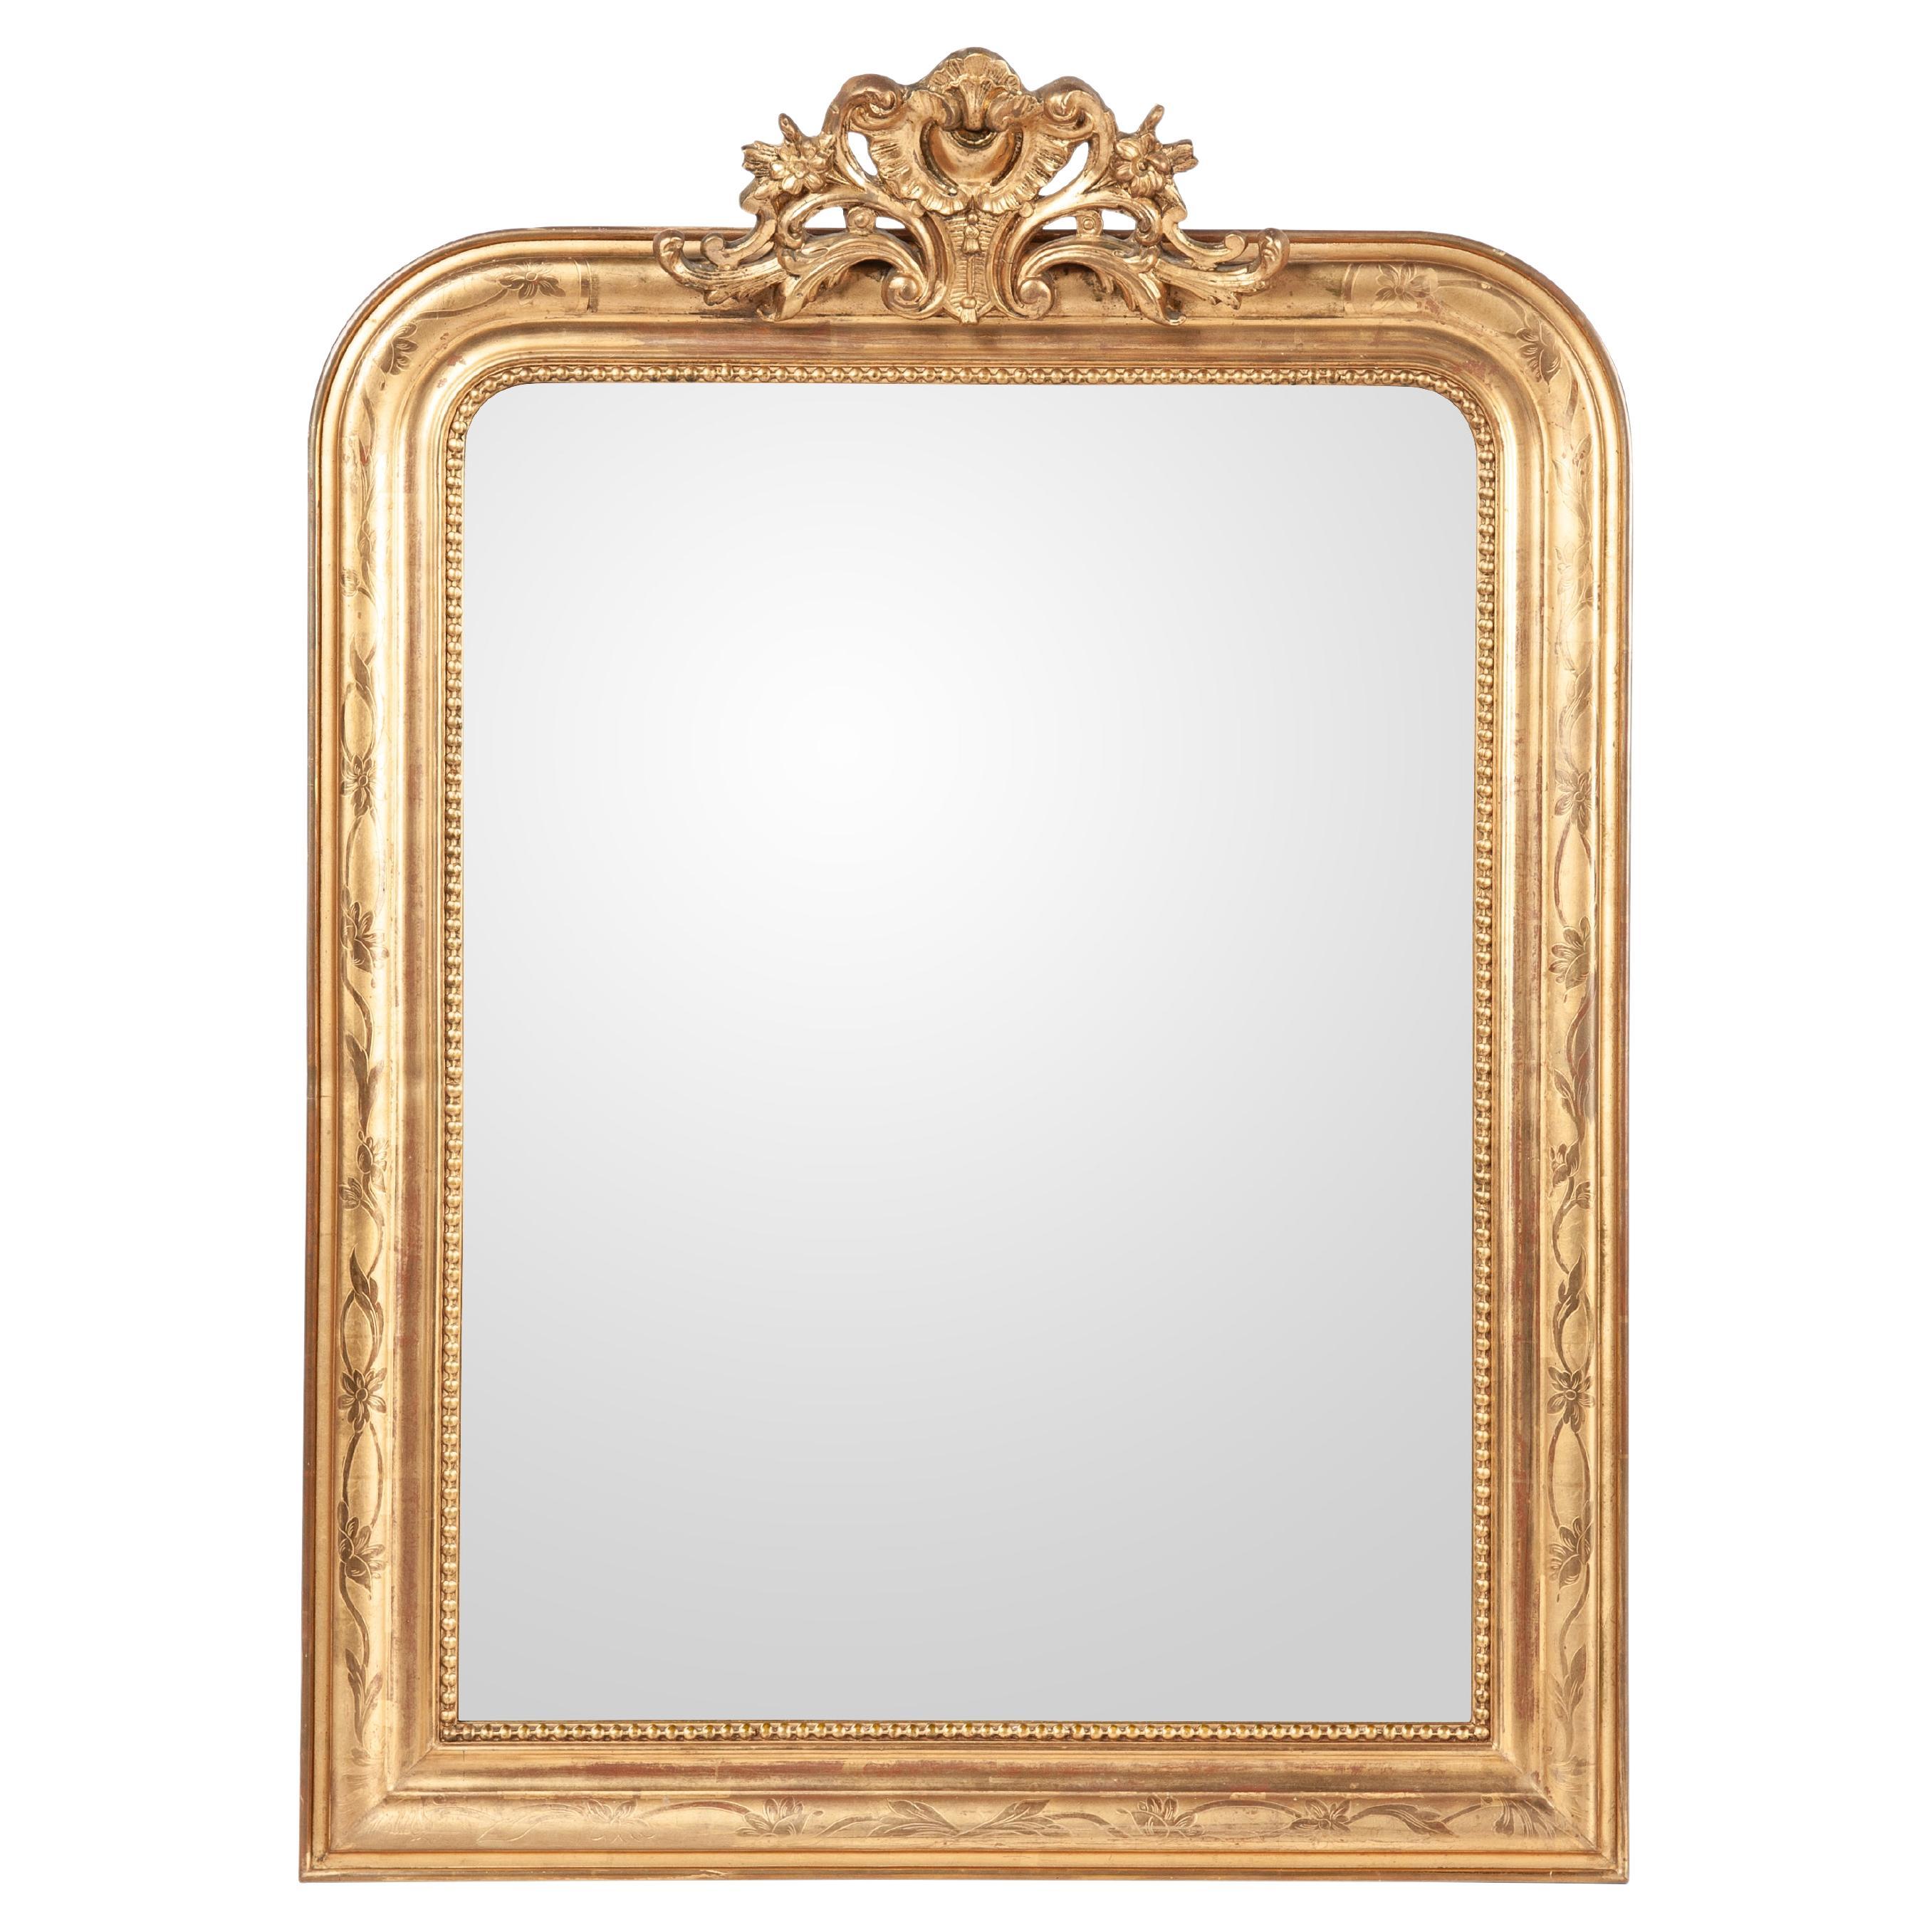 Antique 19th-century French gold leaf gilt Louis Philippe mirror with crest